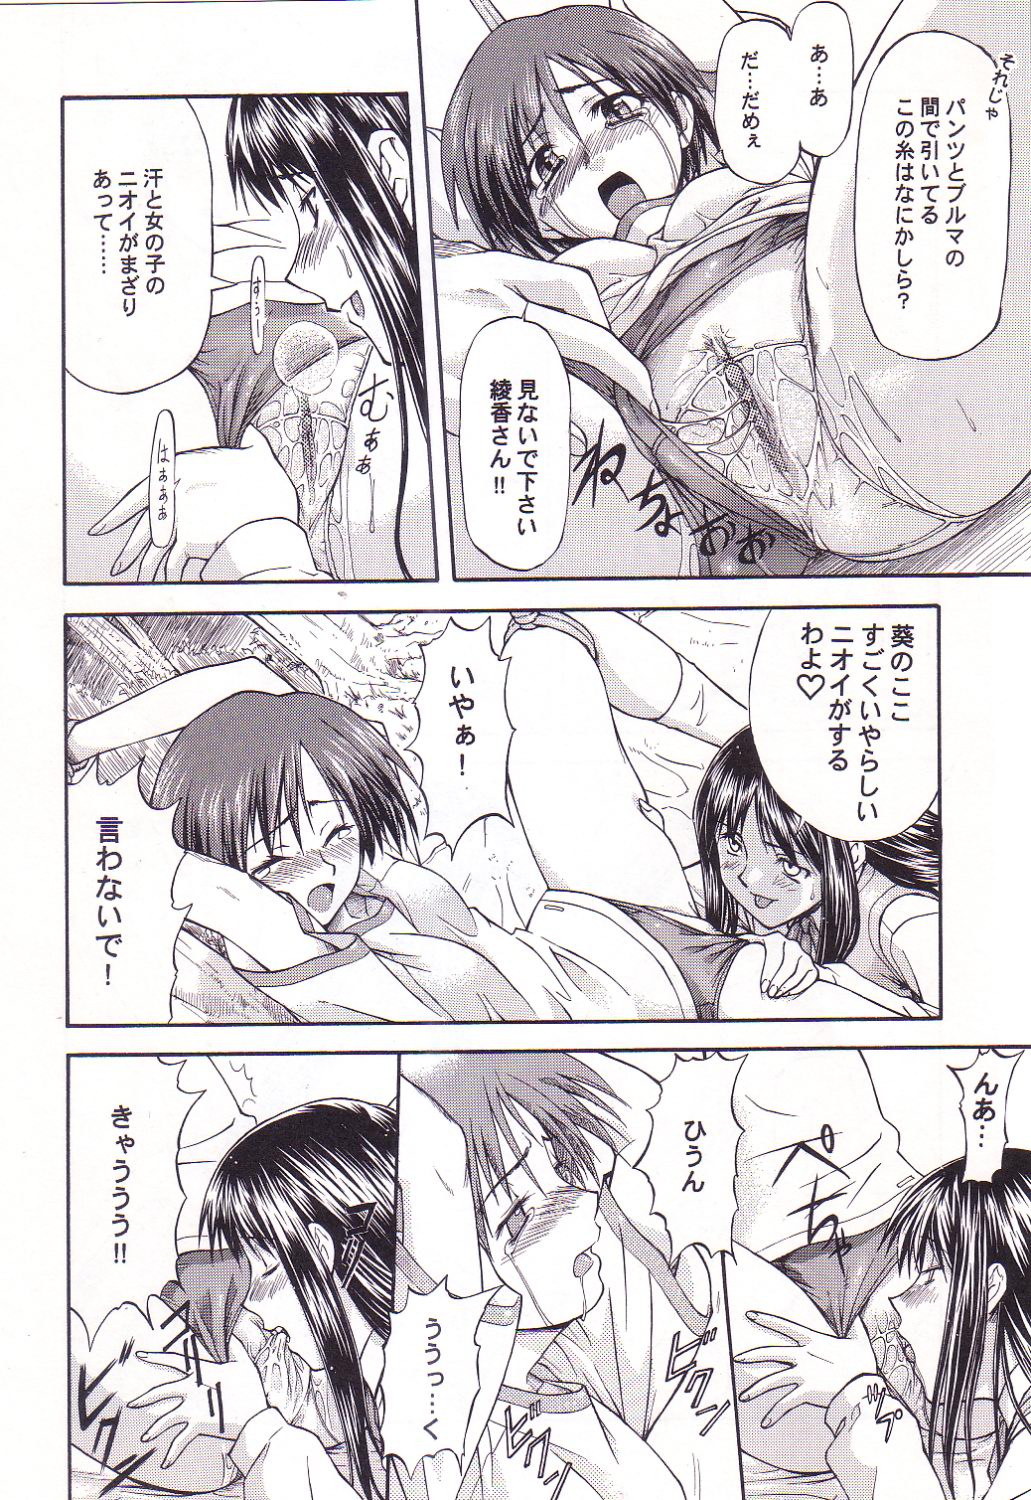 [Leaf Party (Nagare Ippon)] LeLe Pappa Vol. 3 (To Heart) page 9 full